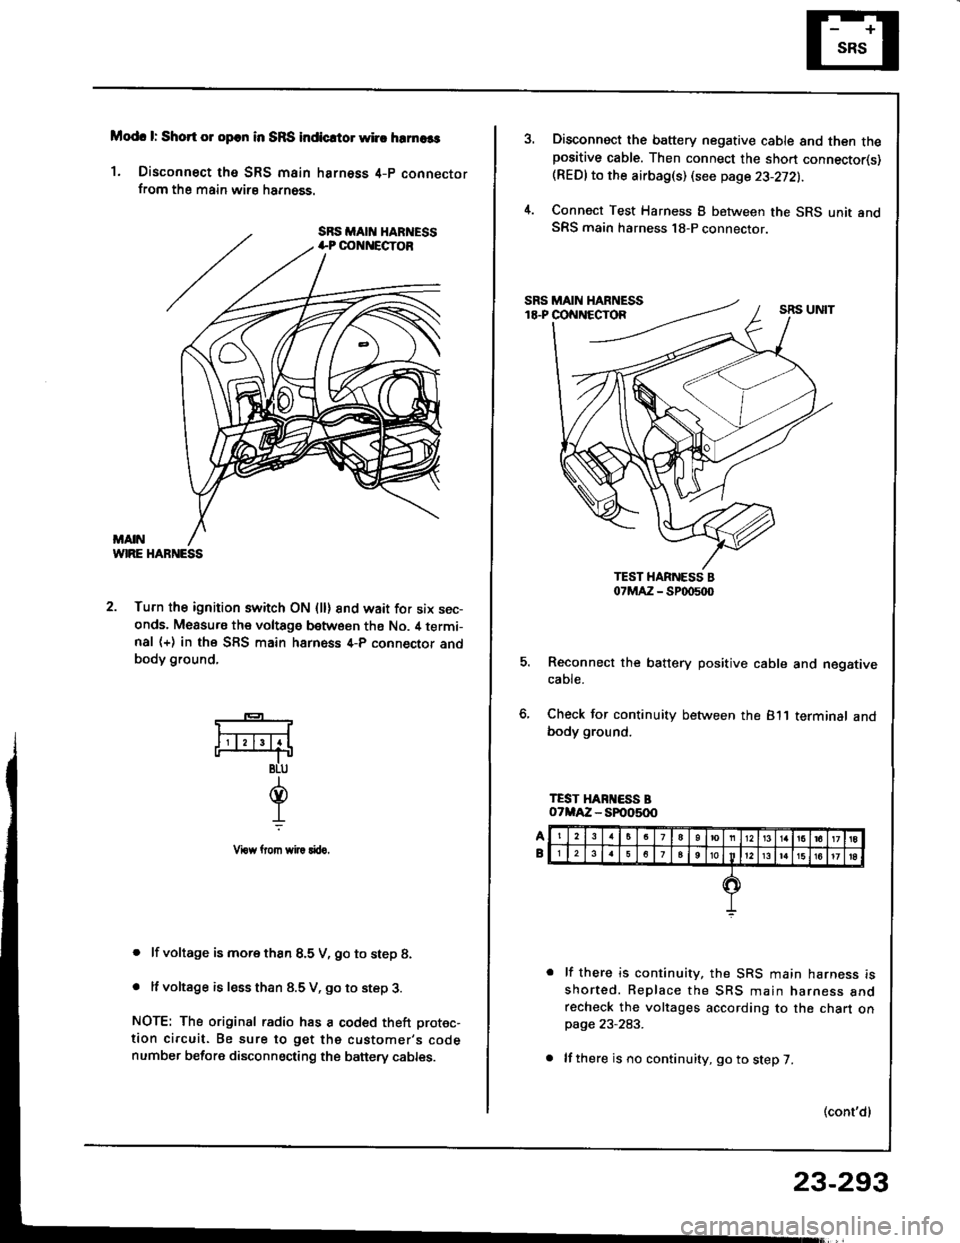 HONDA INTEGRA 1994 4.G Repair Manual Modc l: Short 01 opcn in SRS indicrtor whc hrrnaas
1. Disconnect tho SRS main harness 4-p connectorfrom the main wirs harn6ss.
WIRE HABNESS
2. Turn the ignition switch ON (ll) 8nd wait for six sec-ond